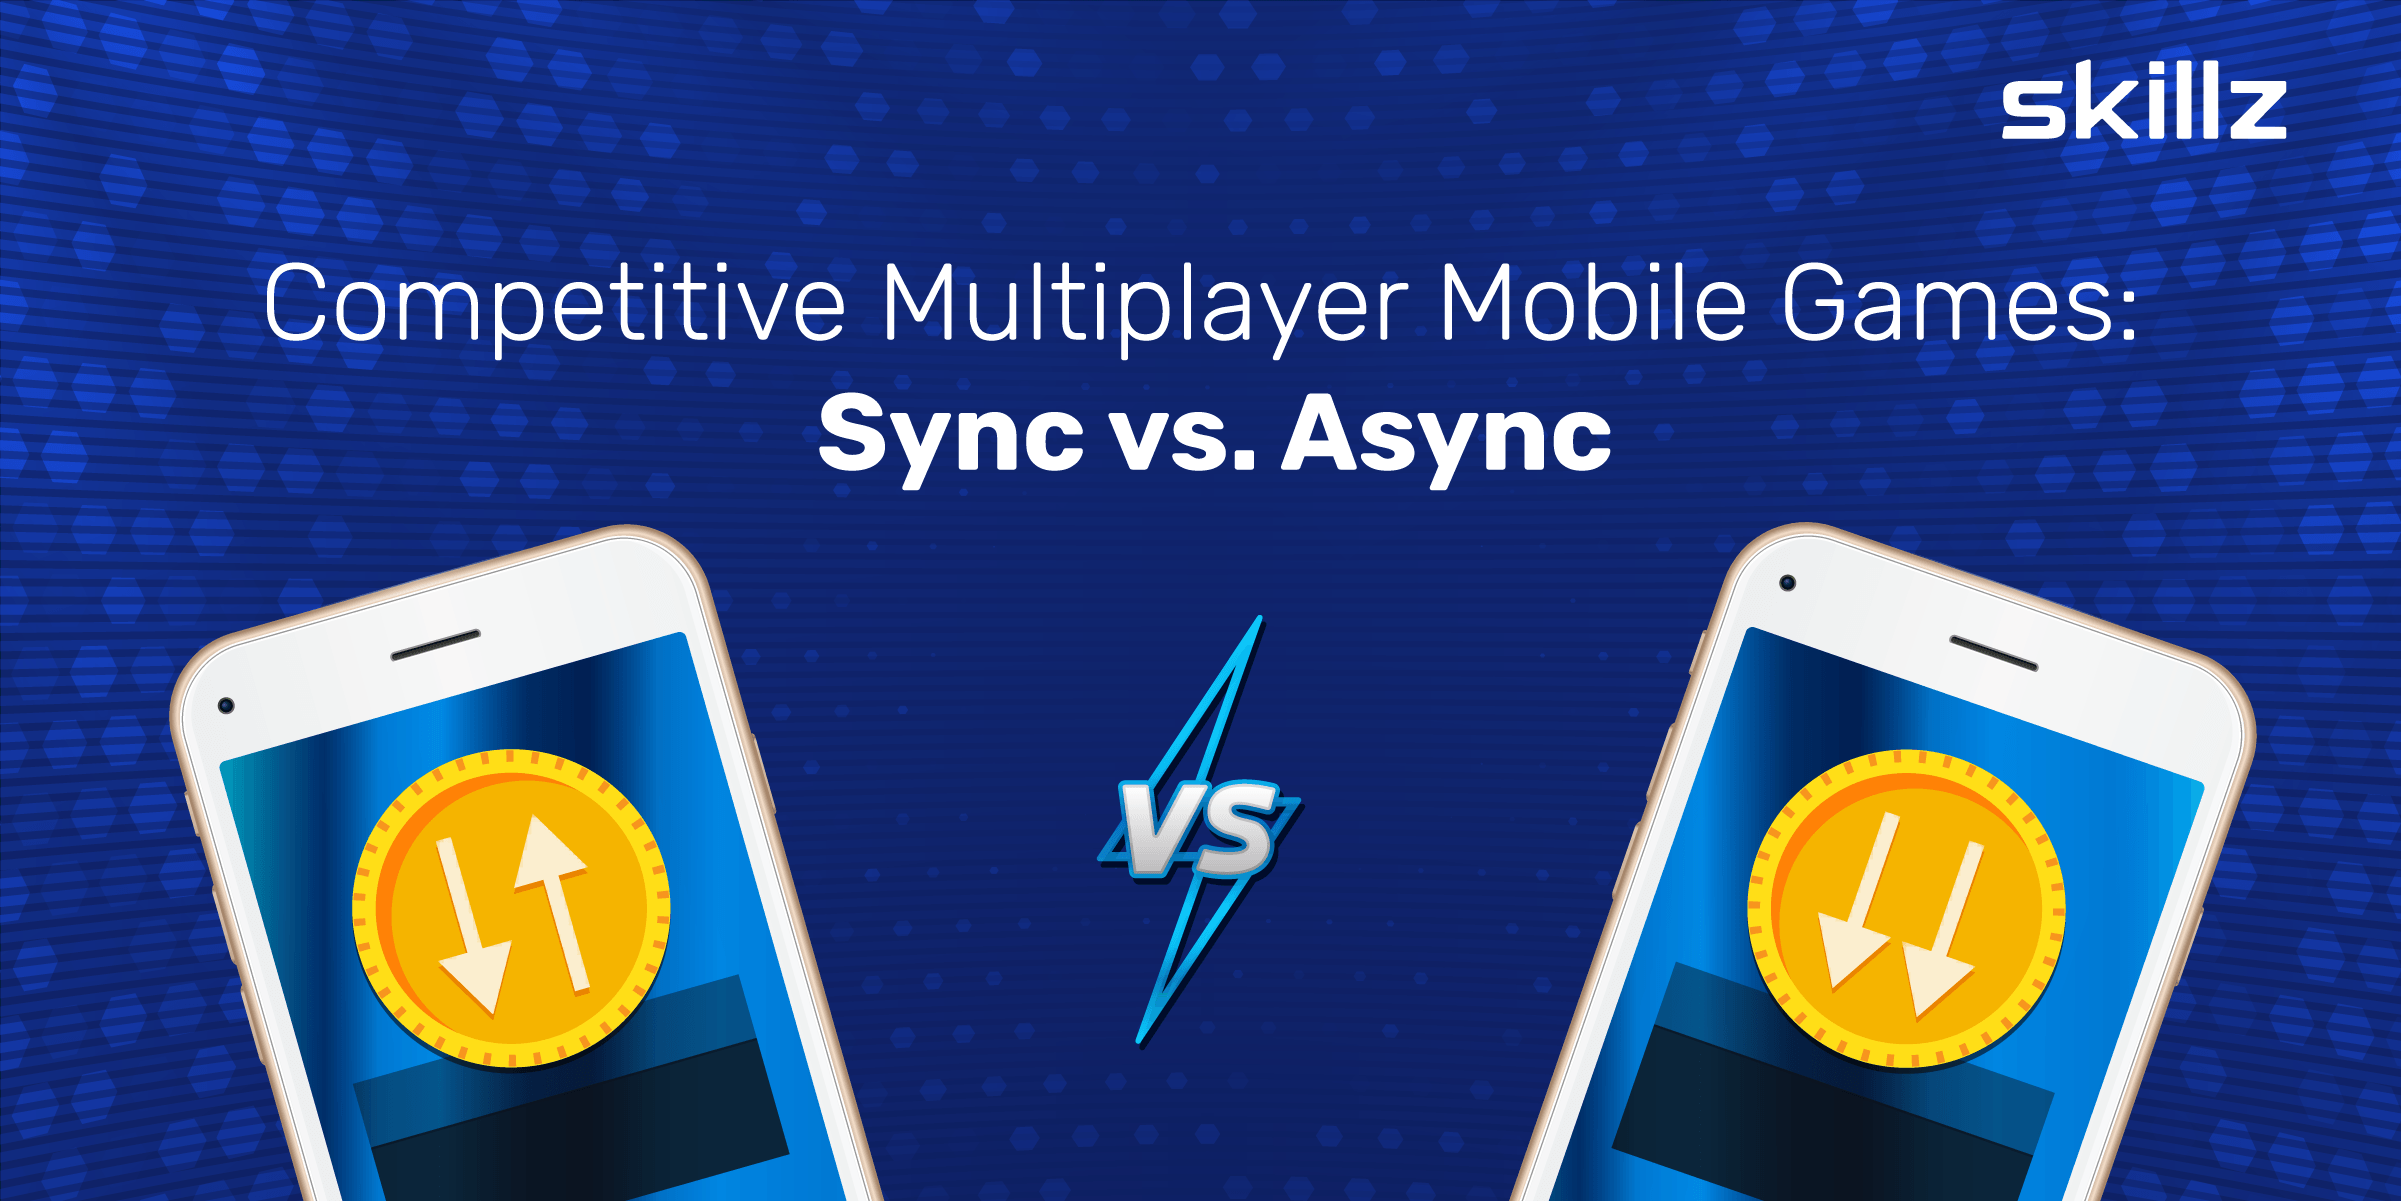 Competitive Multiplayer Mobile Games: Synchronous vs. Asynchronous